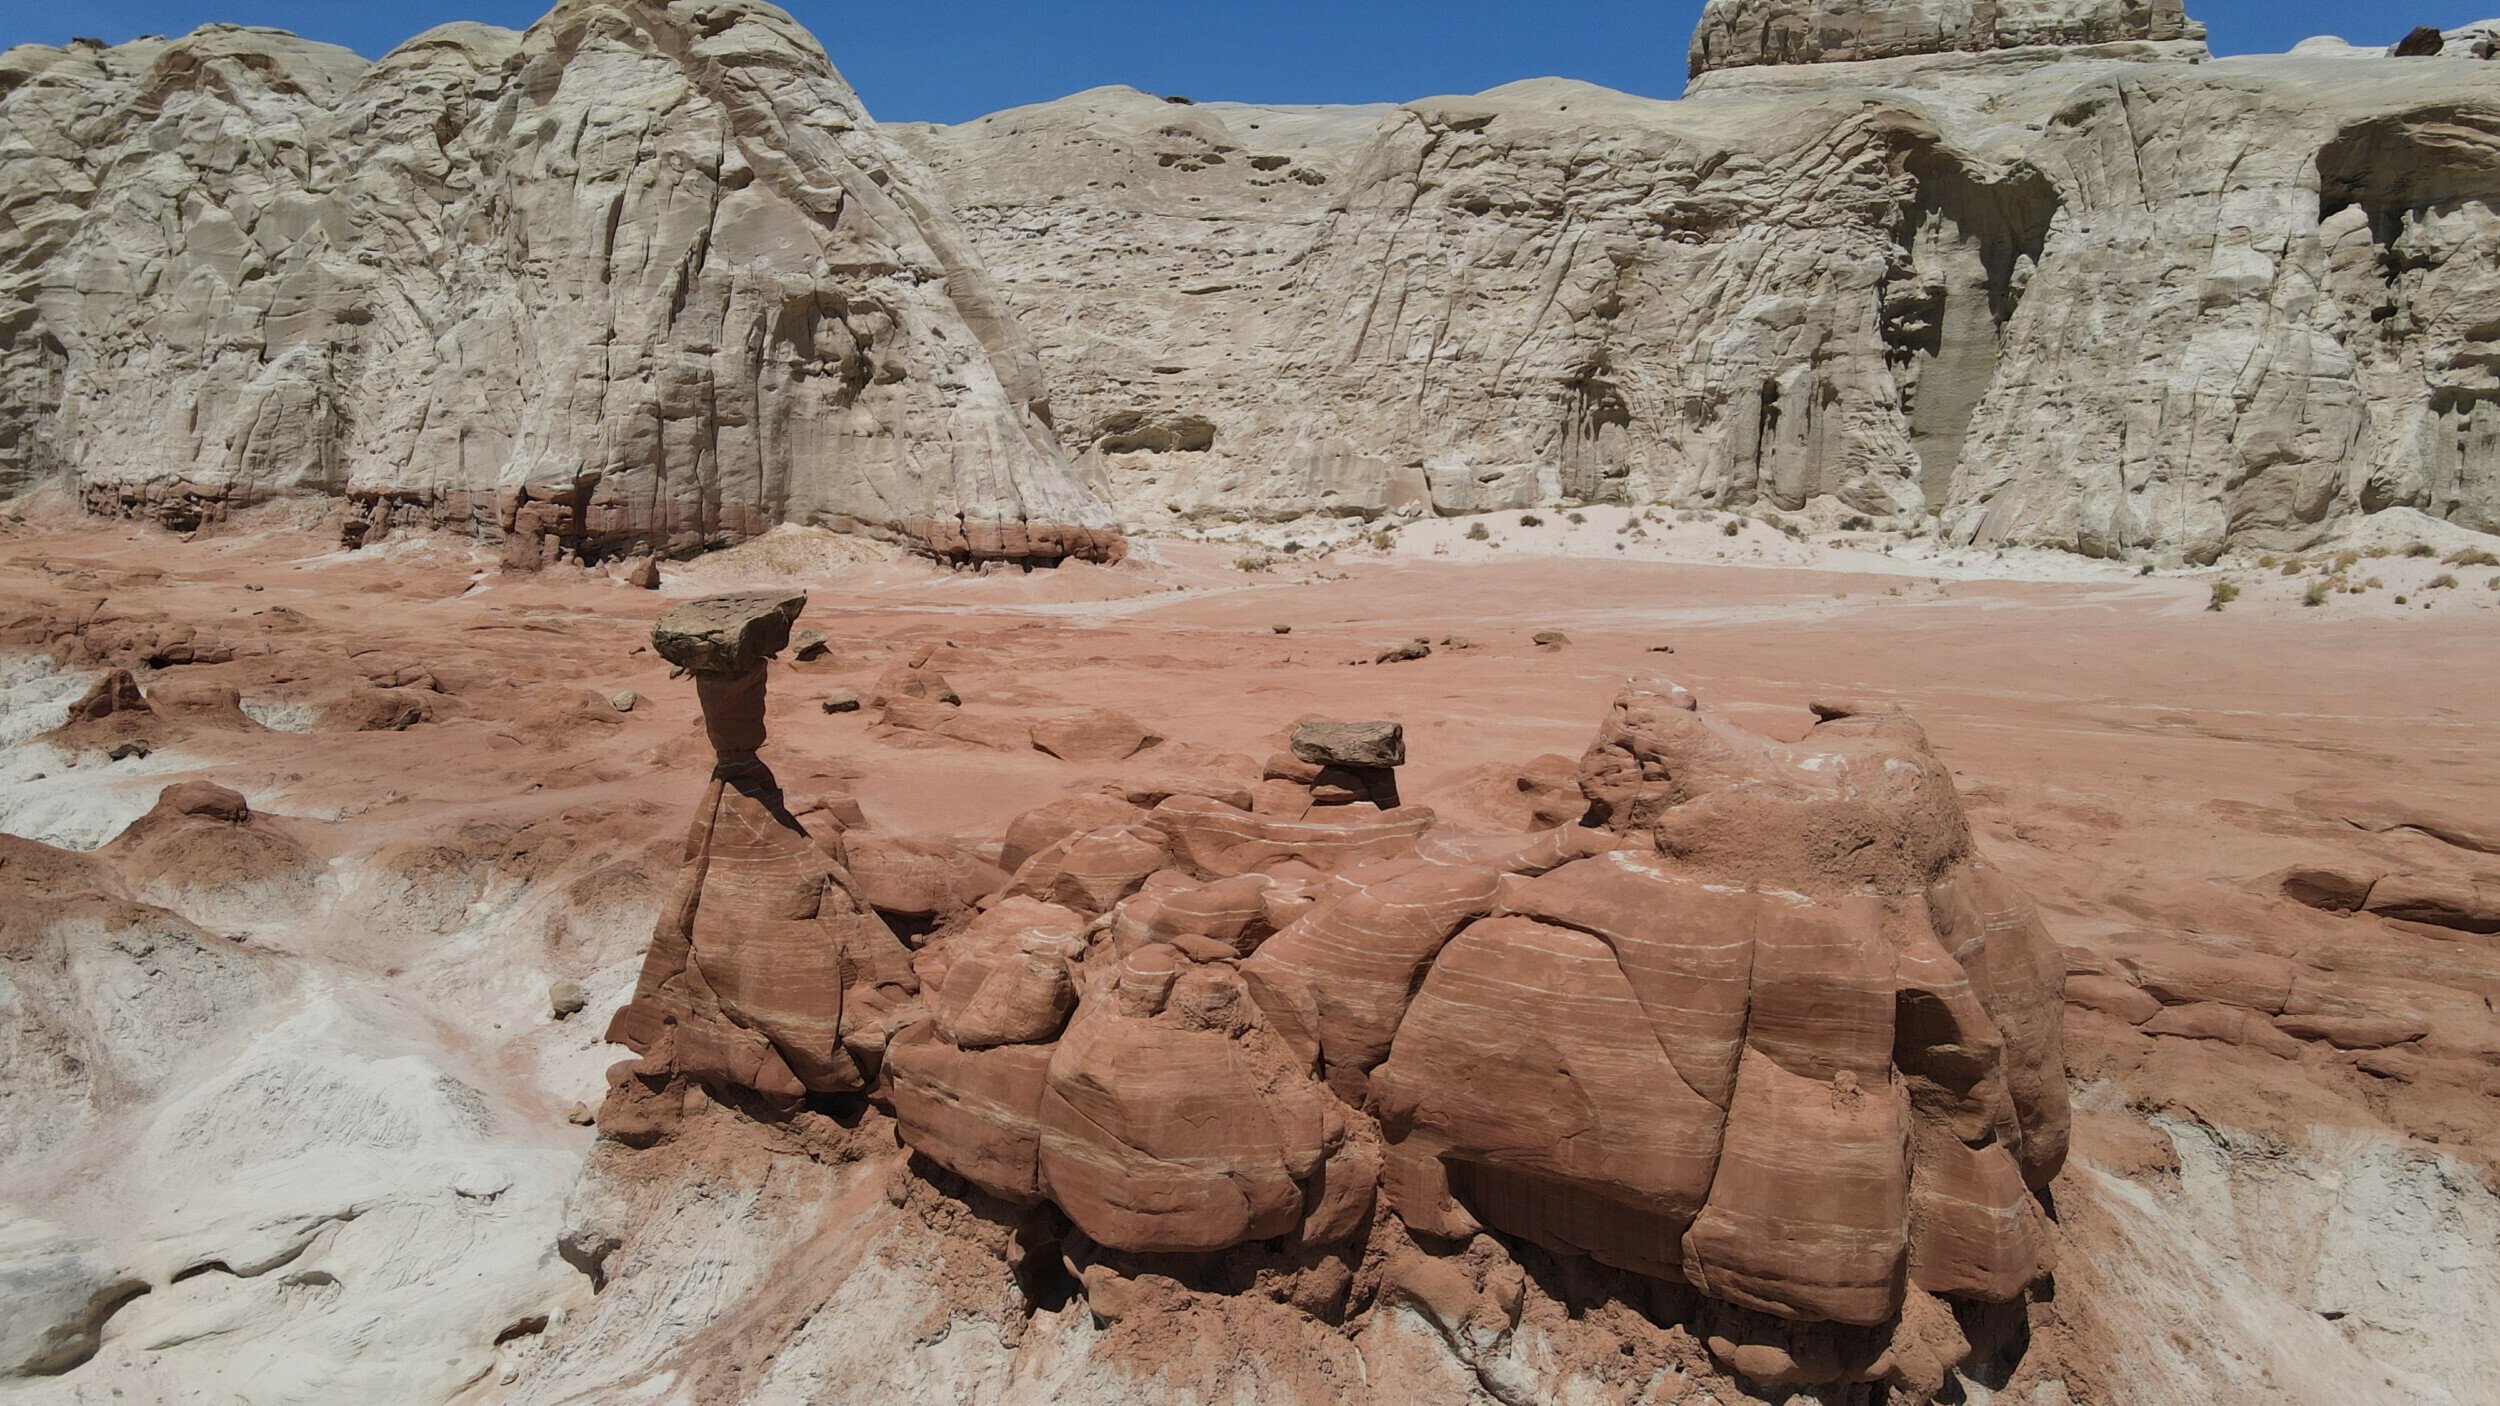 Sun-drenched Toadstool Hoodoos at Kanab, Utah, has unique rock formations and contrasting white and red sandstone layers.